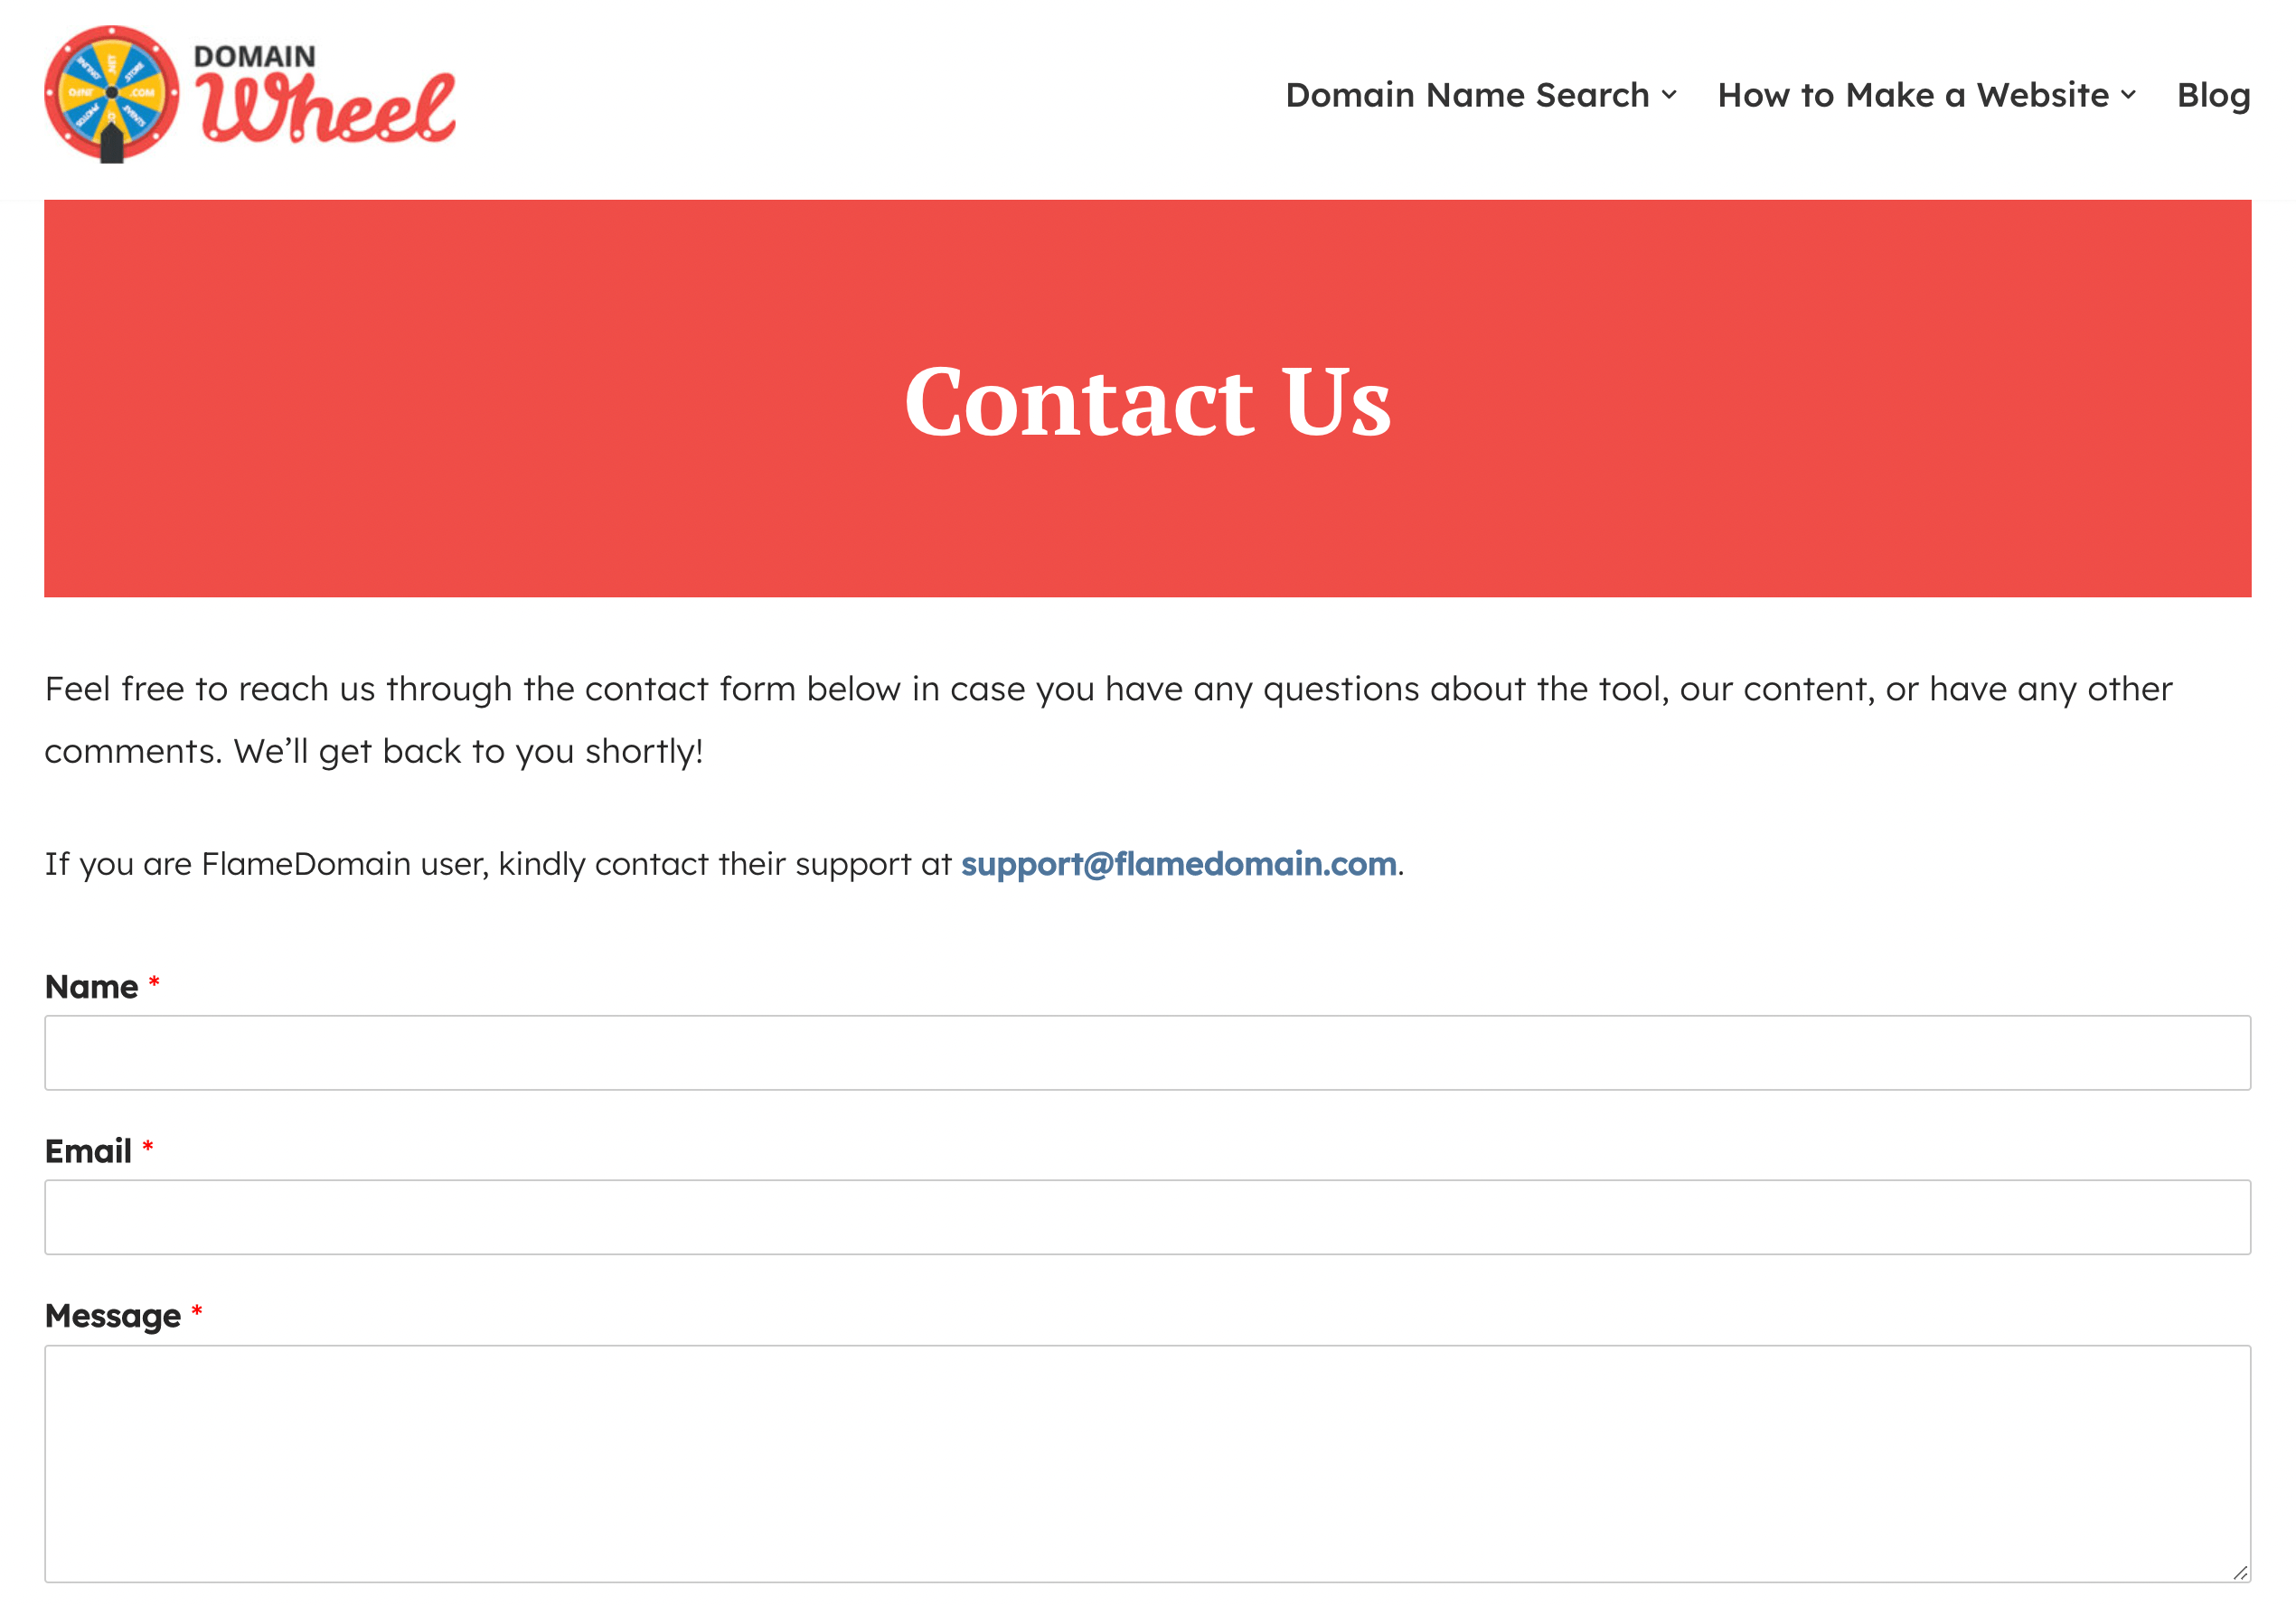 Domain Wheel's contact page